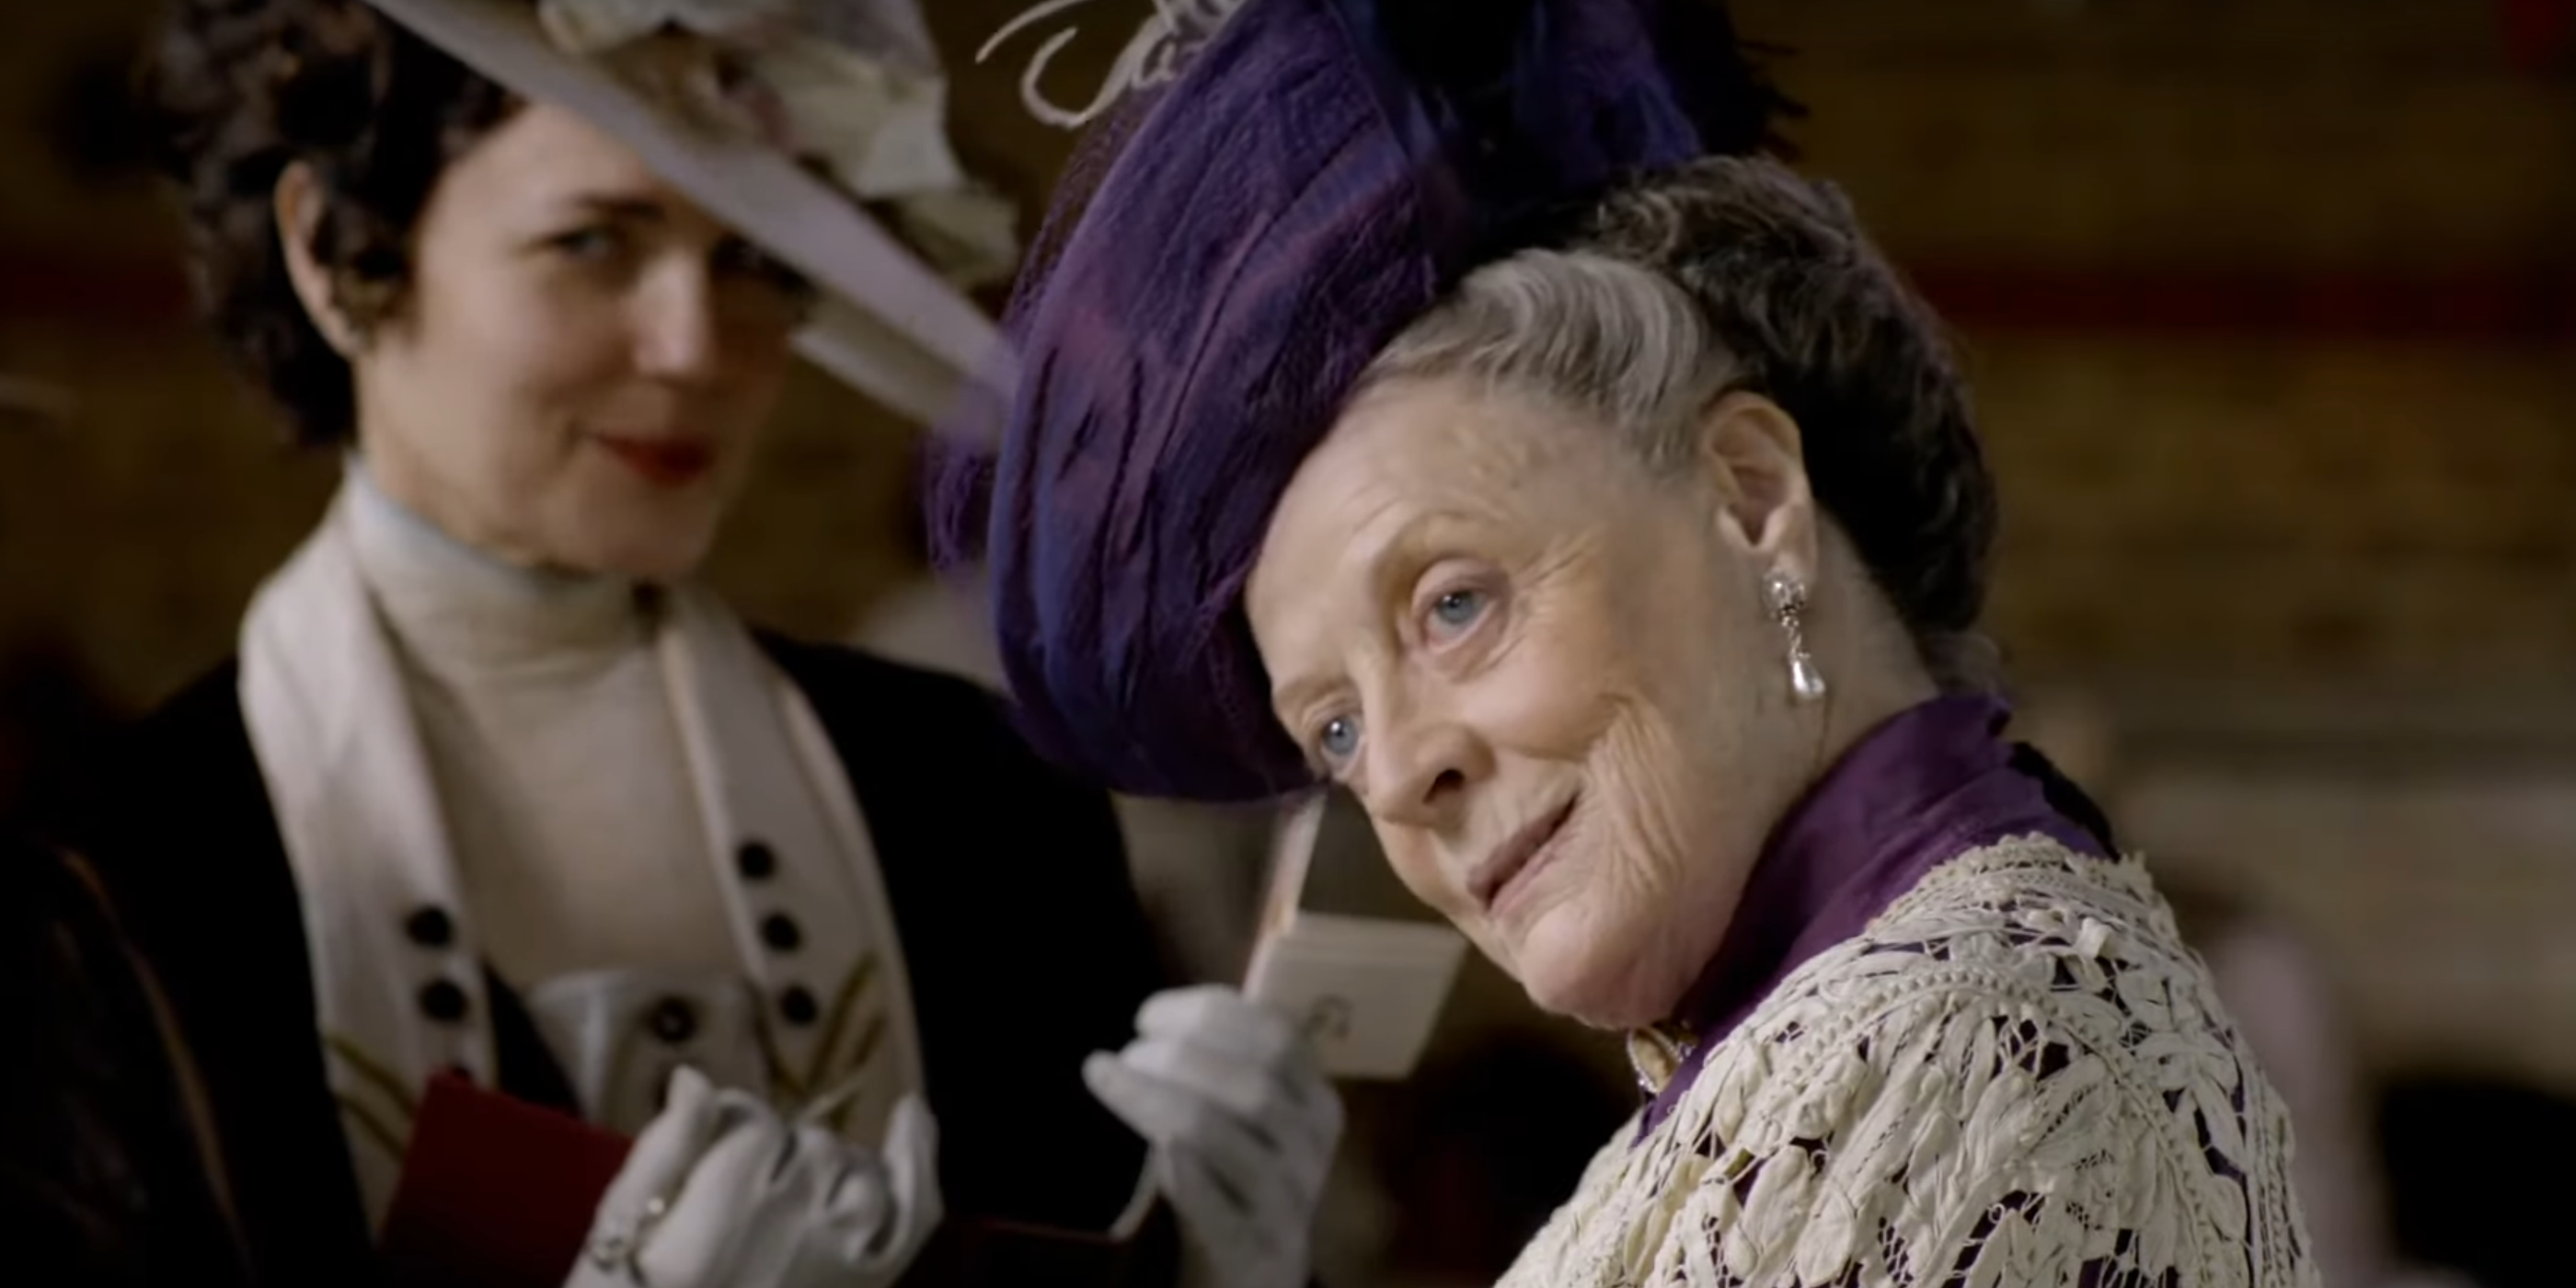 Maggie Smith as the Dowager Countess of Grantham standing in front of Lady Cora Crawley